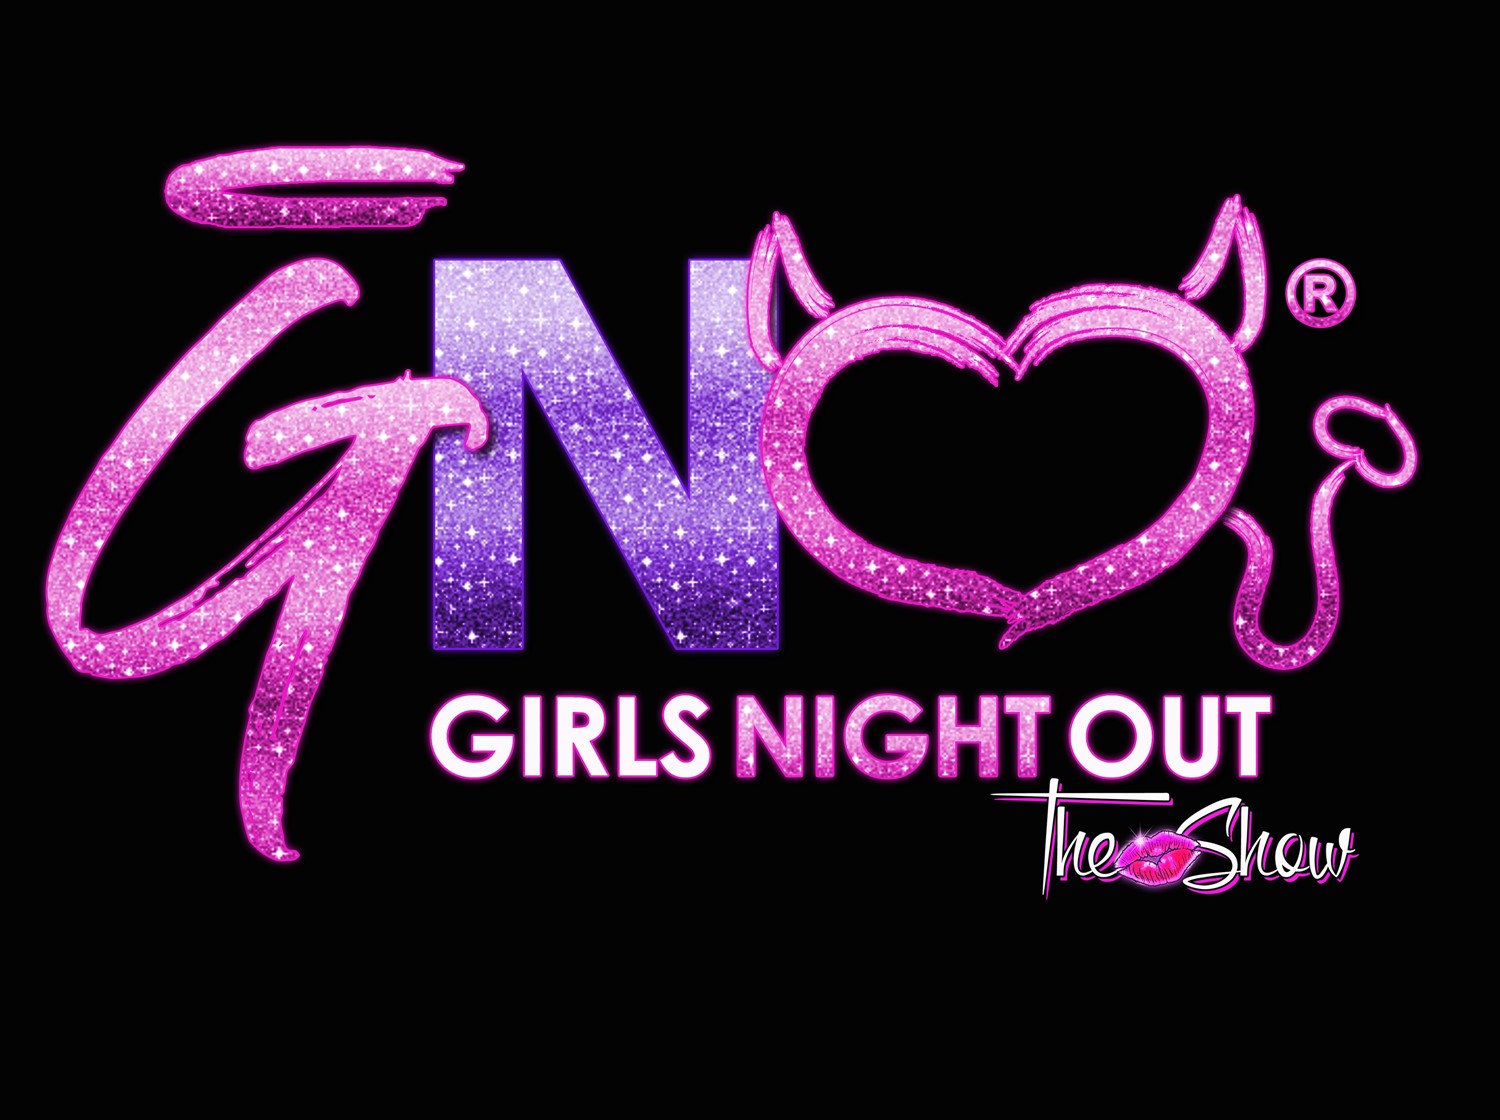 Thompson House (18+) Newport, KY on may. 25, 20:00@Thompson House - Compra entradas y obtén información enGirls Night Out the Show tickets.girlsnightouttheshow.com